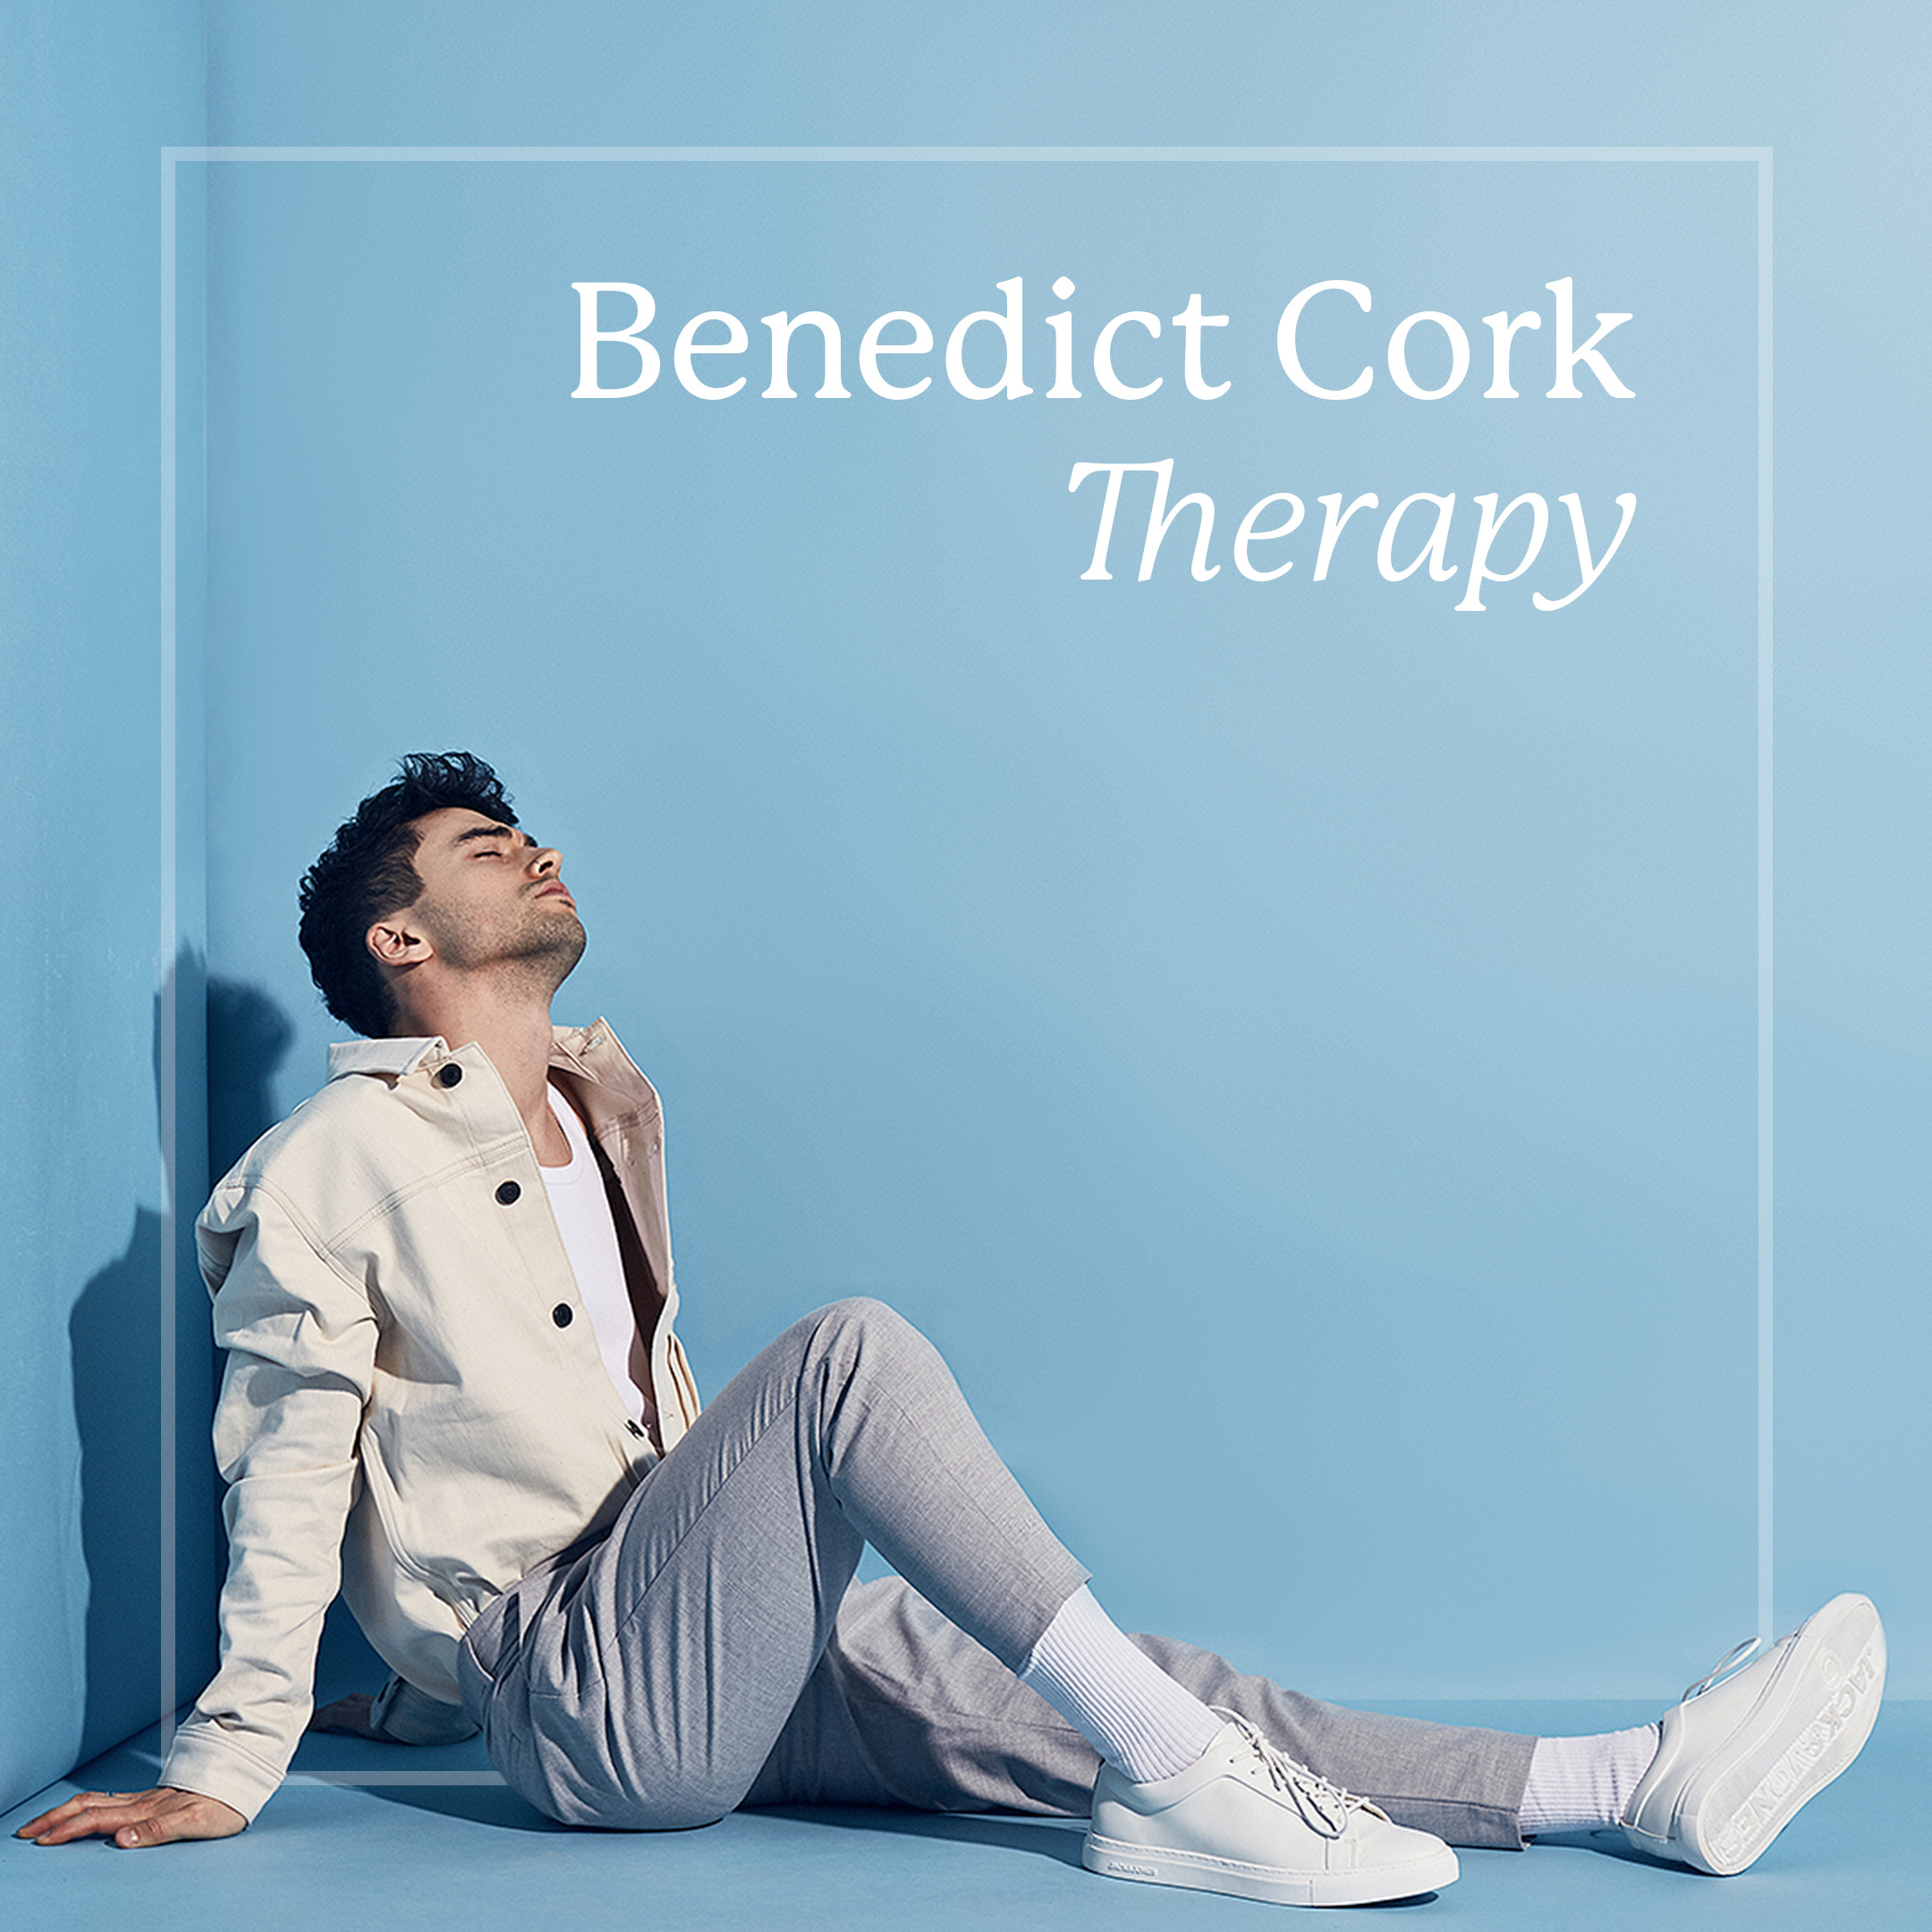 Benedict Cork 'Therapy' by Ian Hippolyte